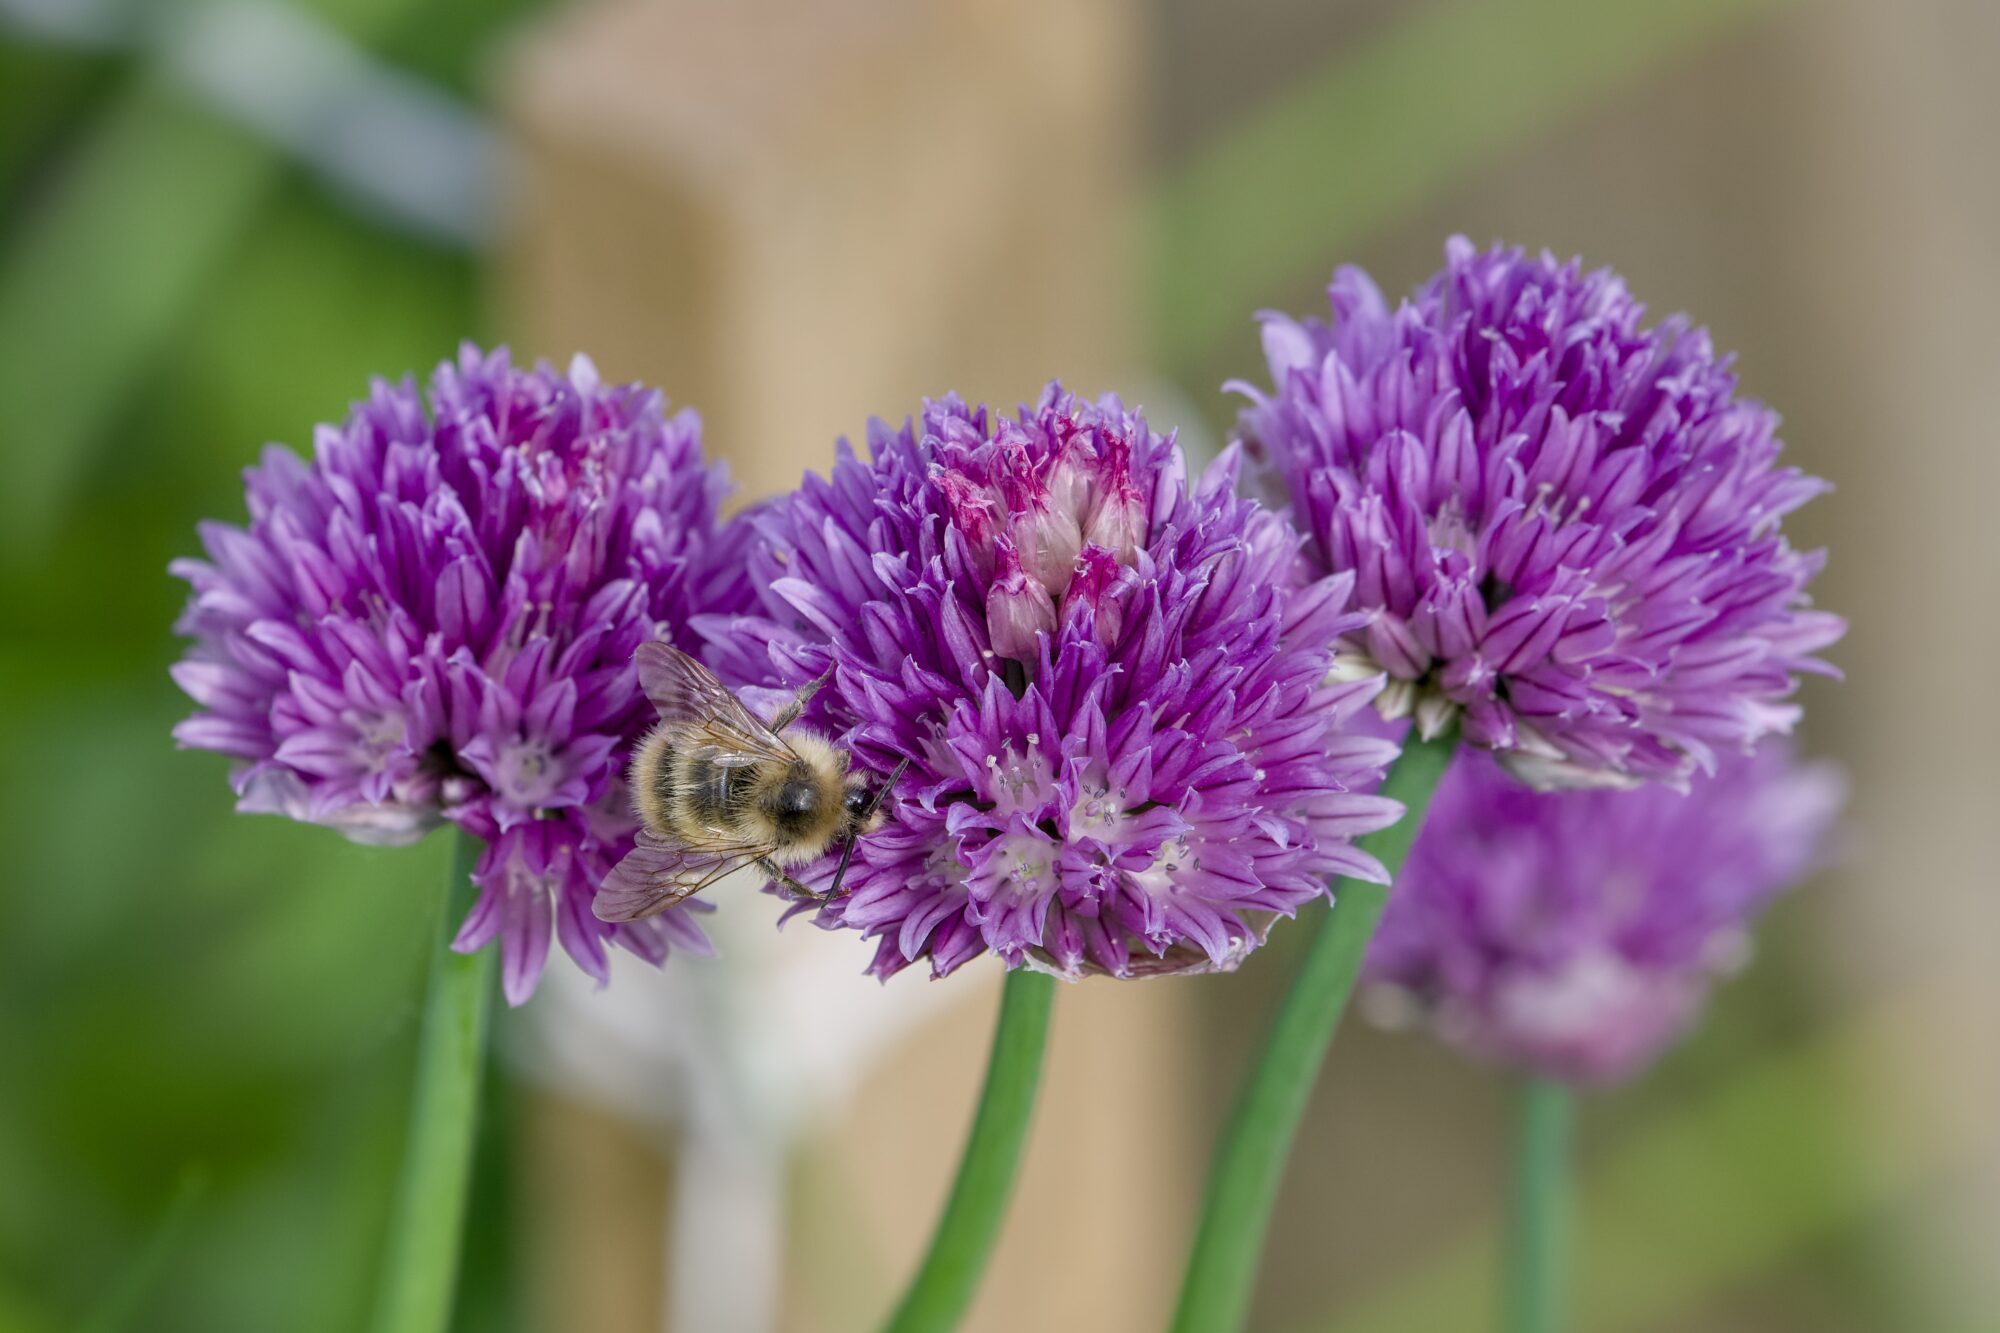 Three chive flowers (spherical clusters of bright mauve flowers) with a single bumblebee crawling from one to another